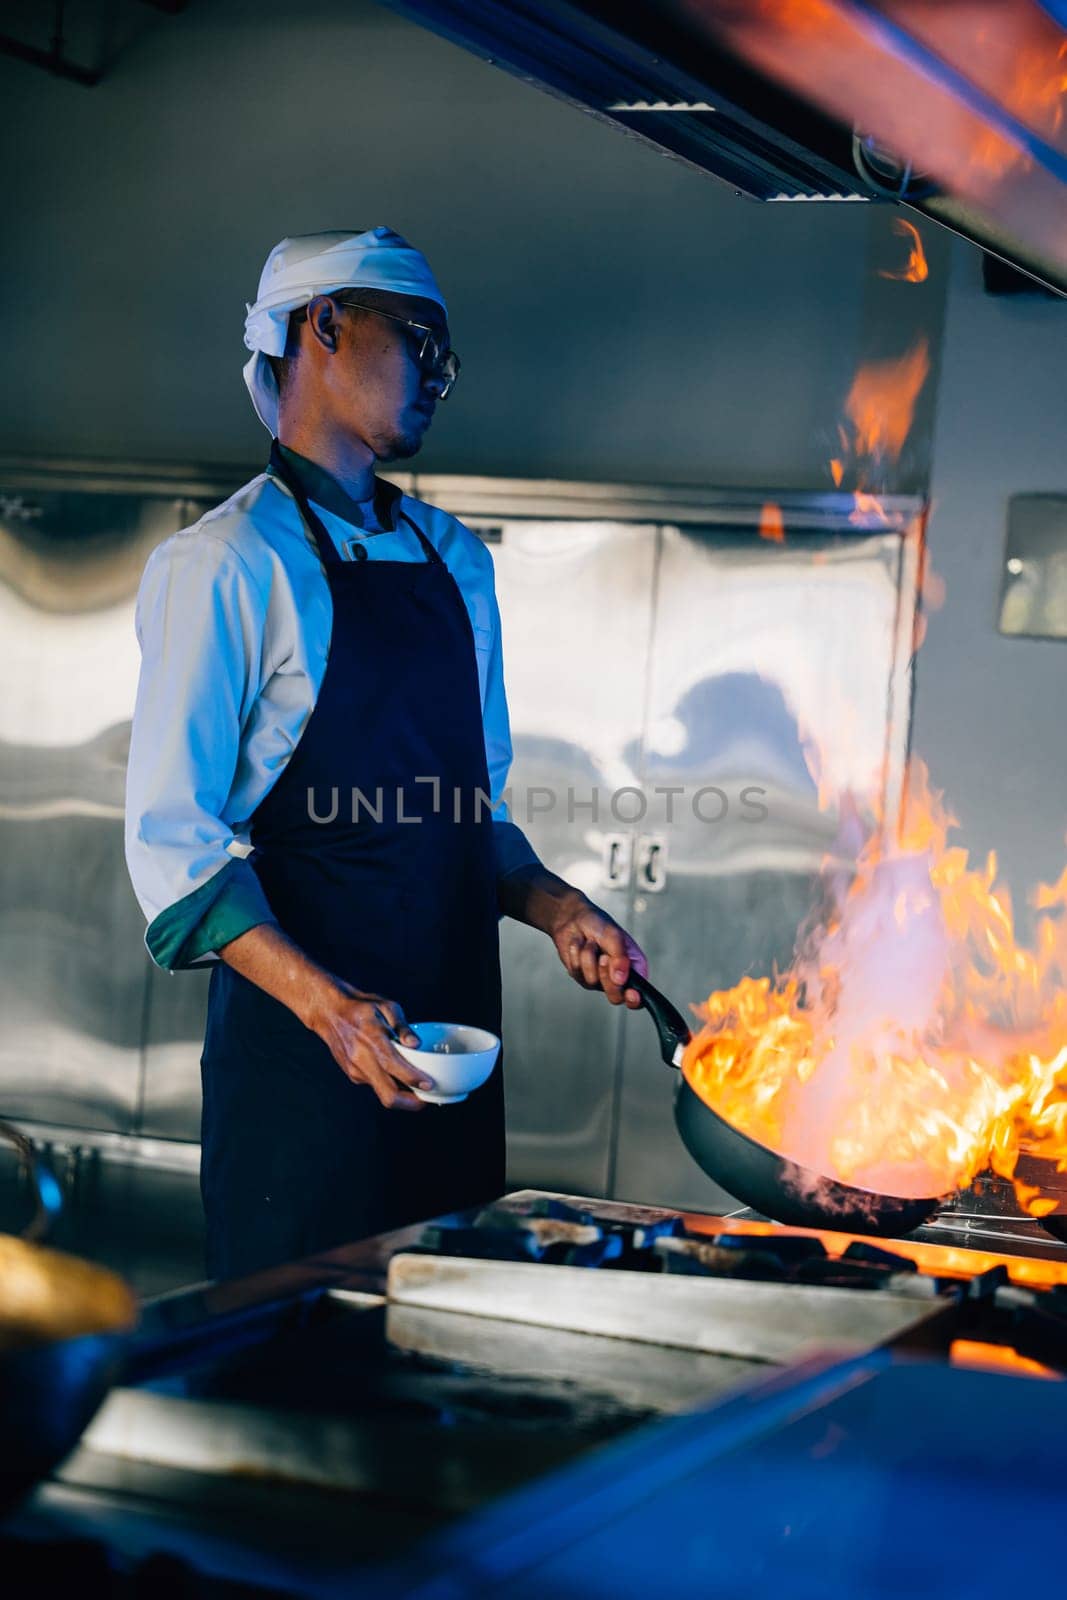 Chef hands holding flaming wok in professional kitchen. Closeup of expert cooking with fire. Chef skill busy at work handling flames in a modern setting. cook food with fire